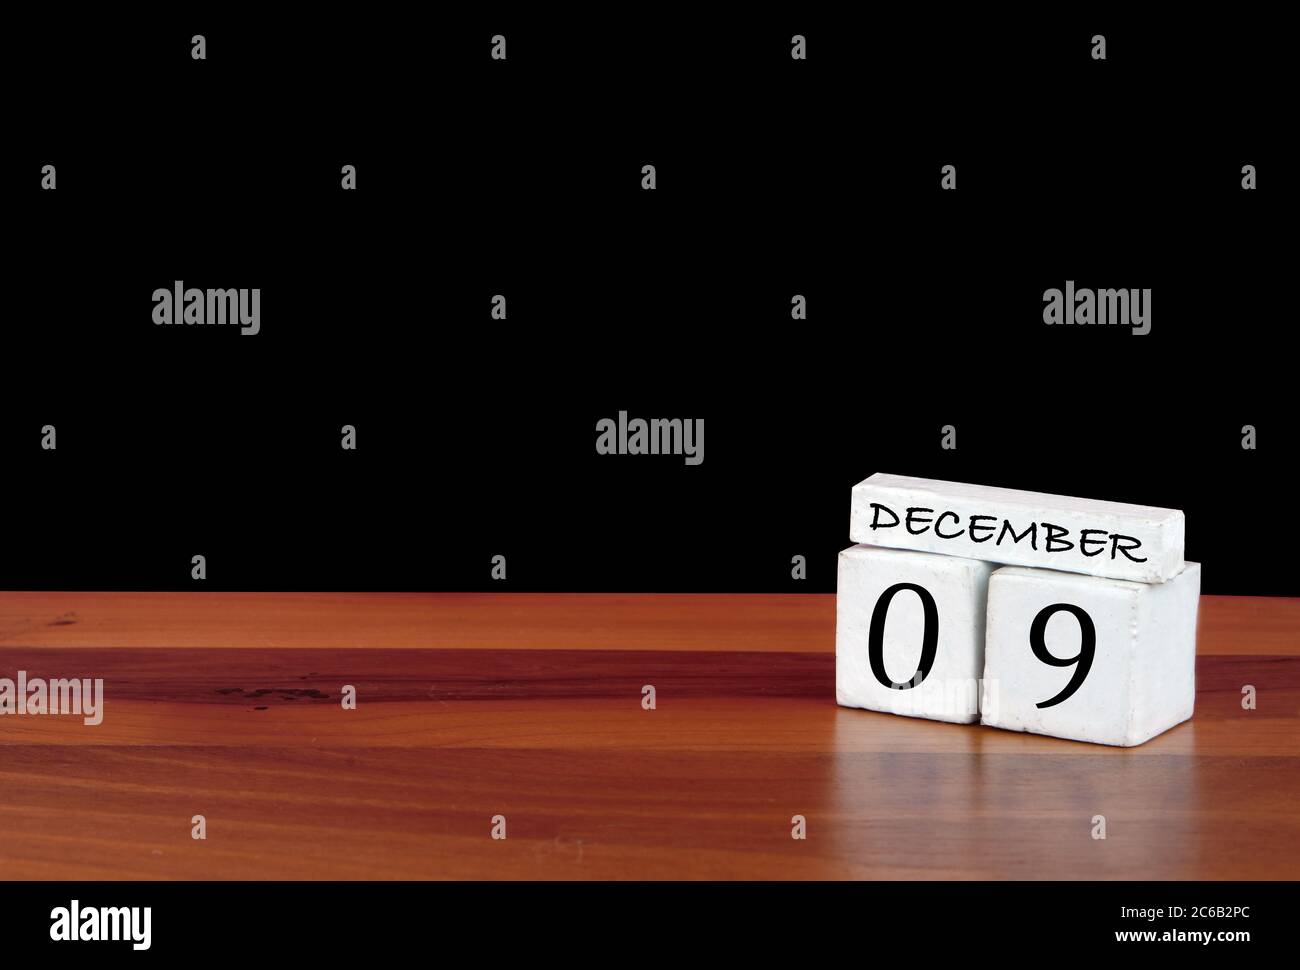 9 December calendar month. 9 days of the month. Reflected calendar on wooden floor with black background Stock Photo